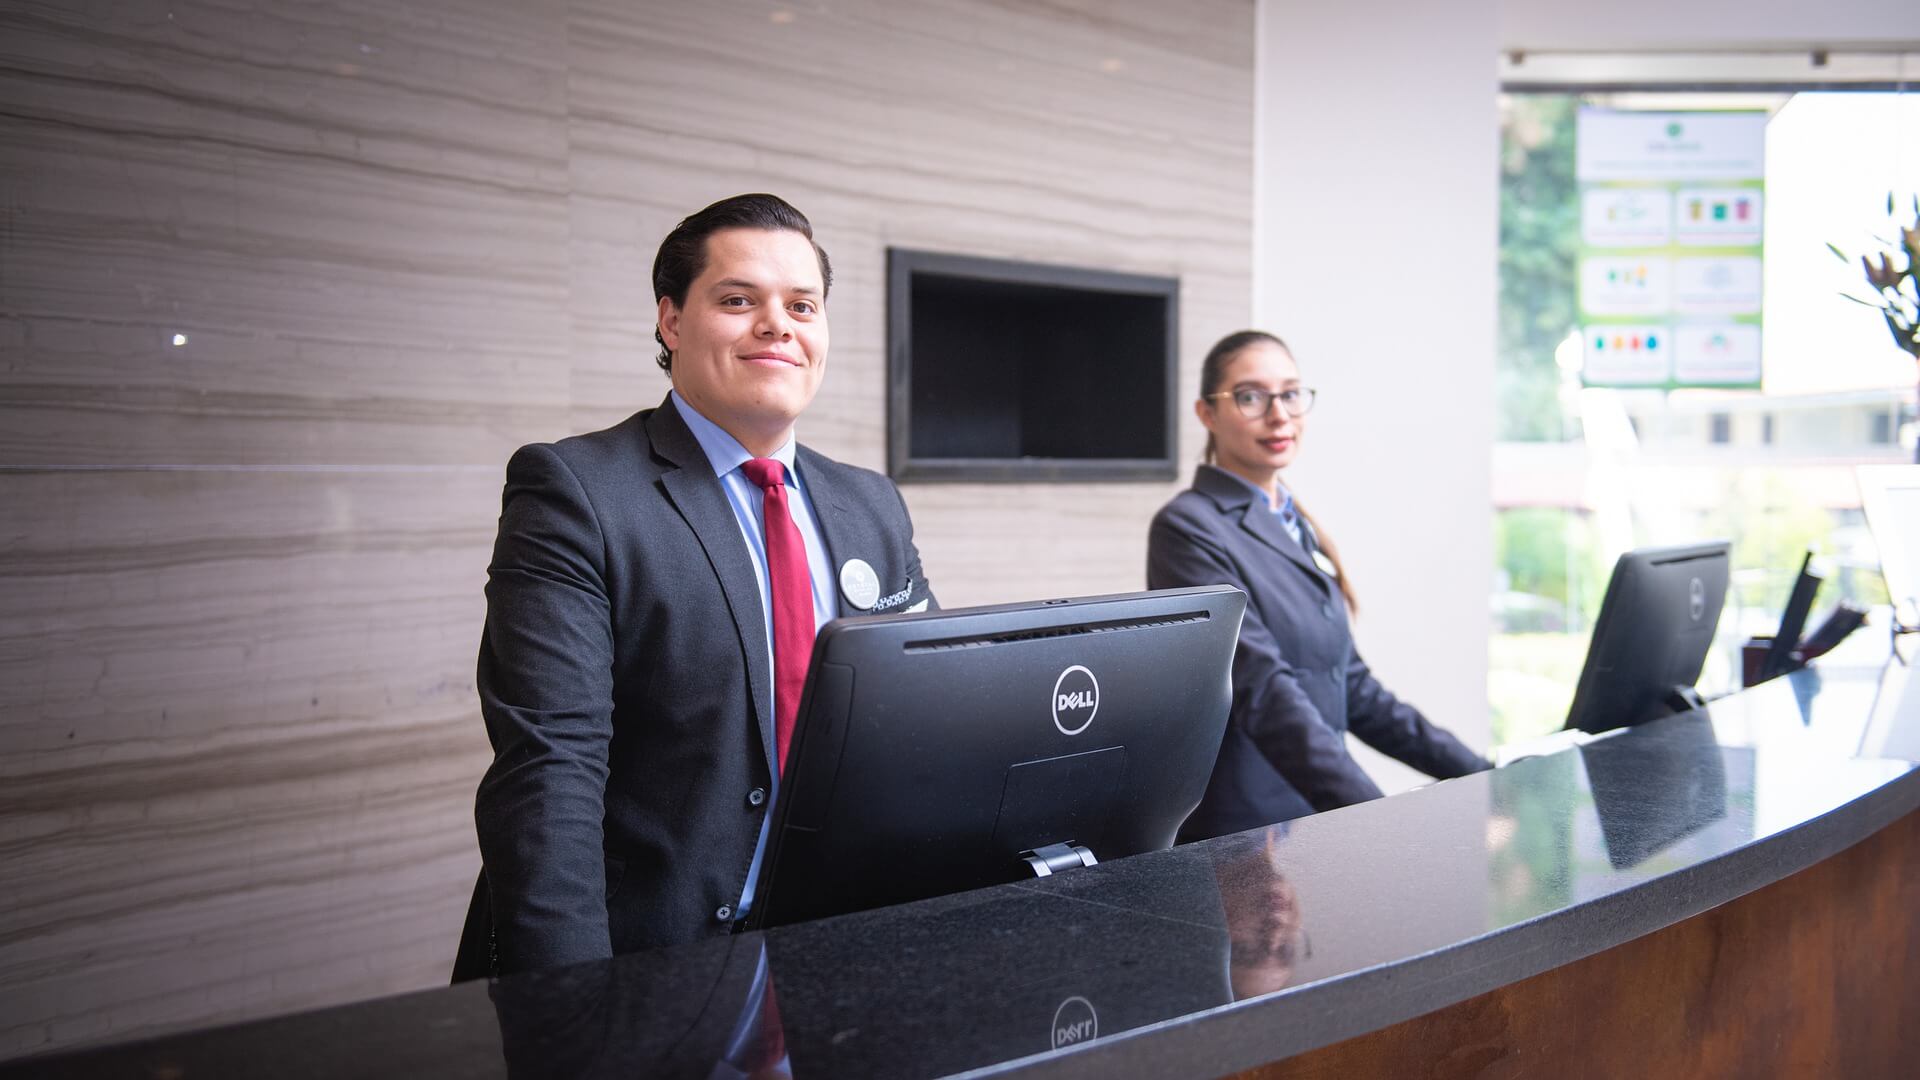 Employees at front desk in hotel lobby